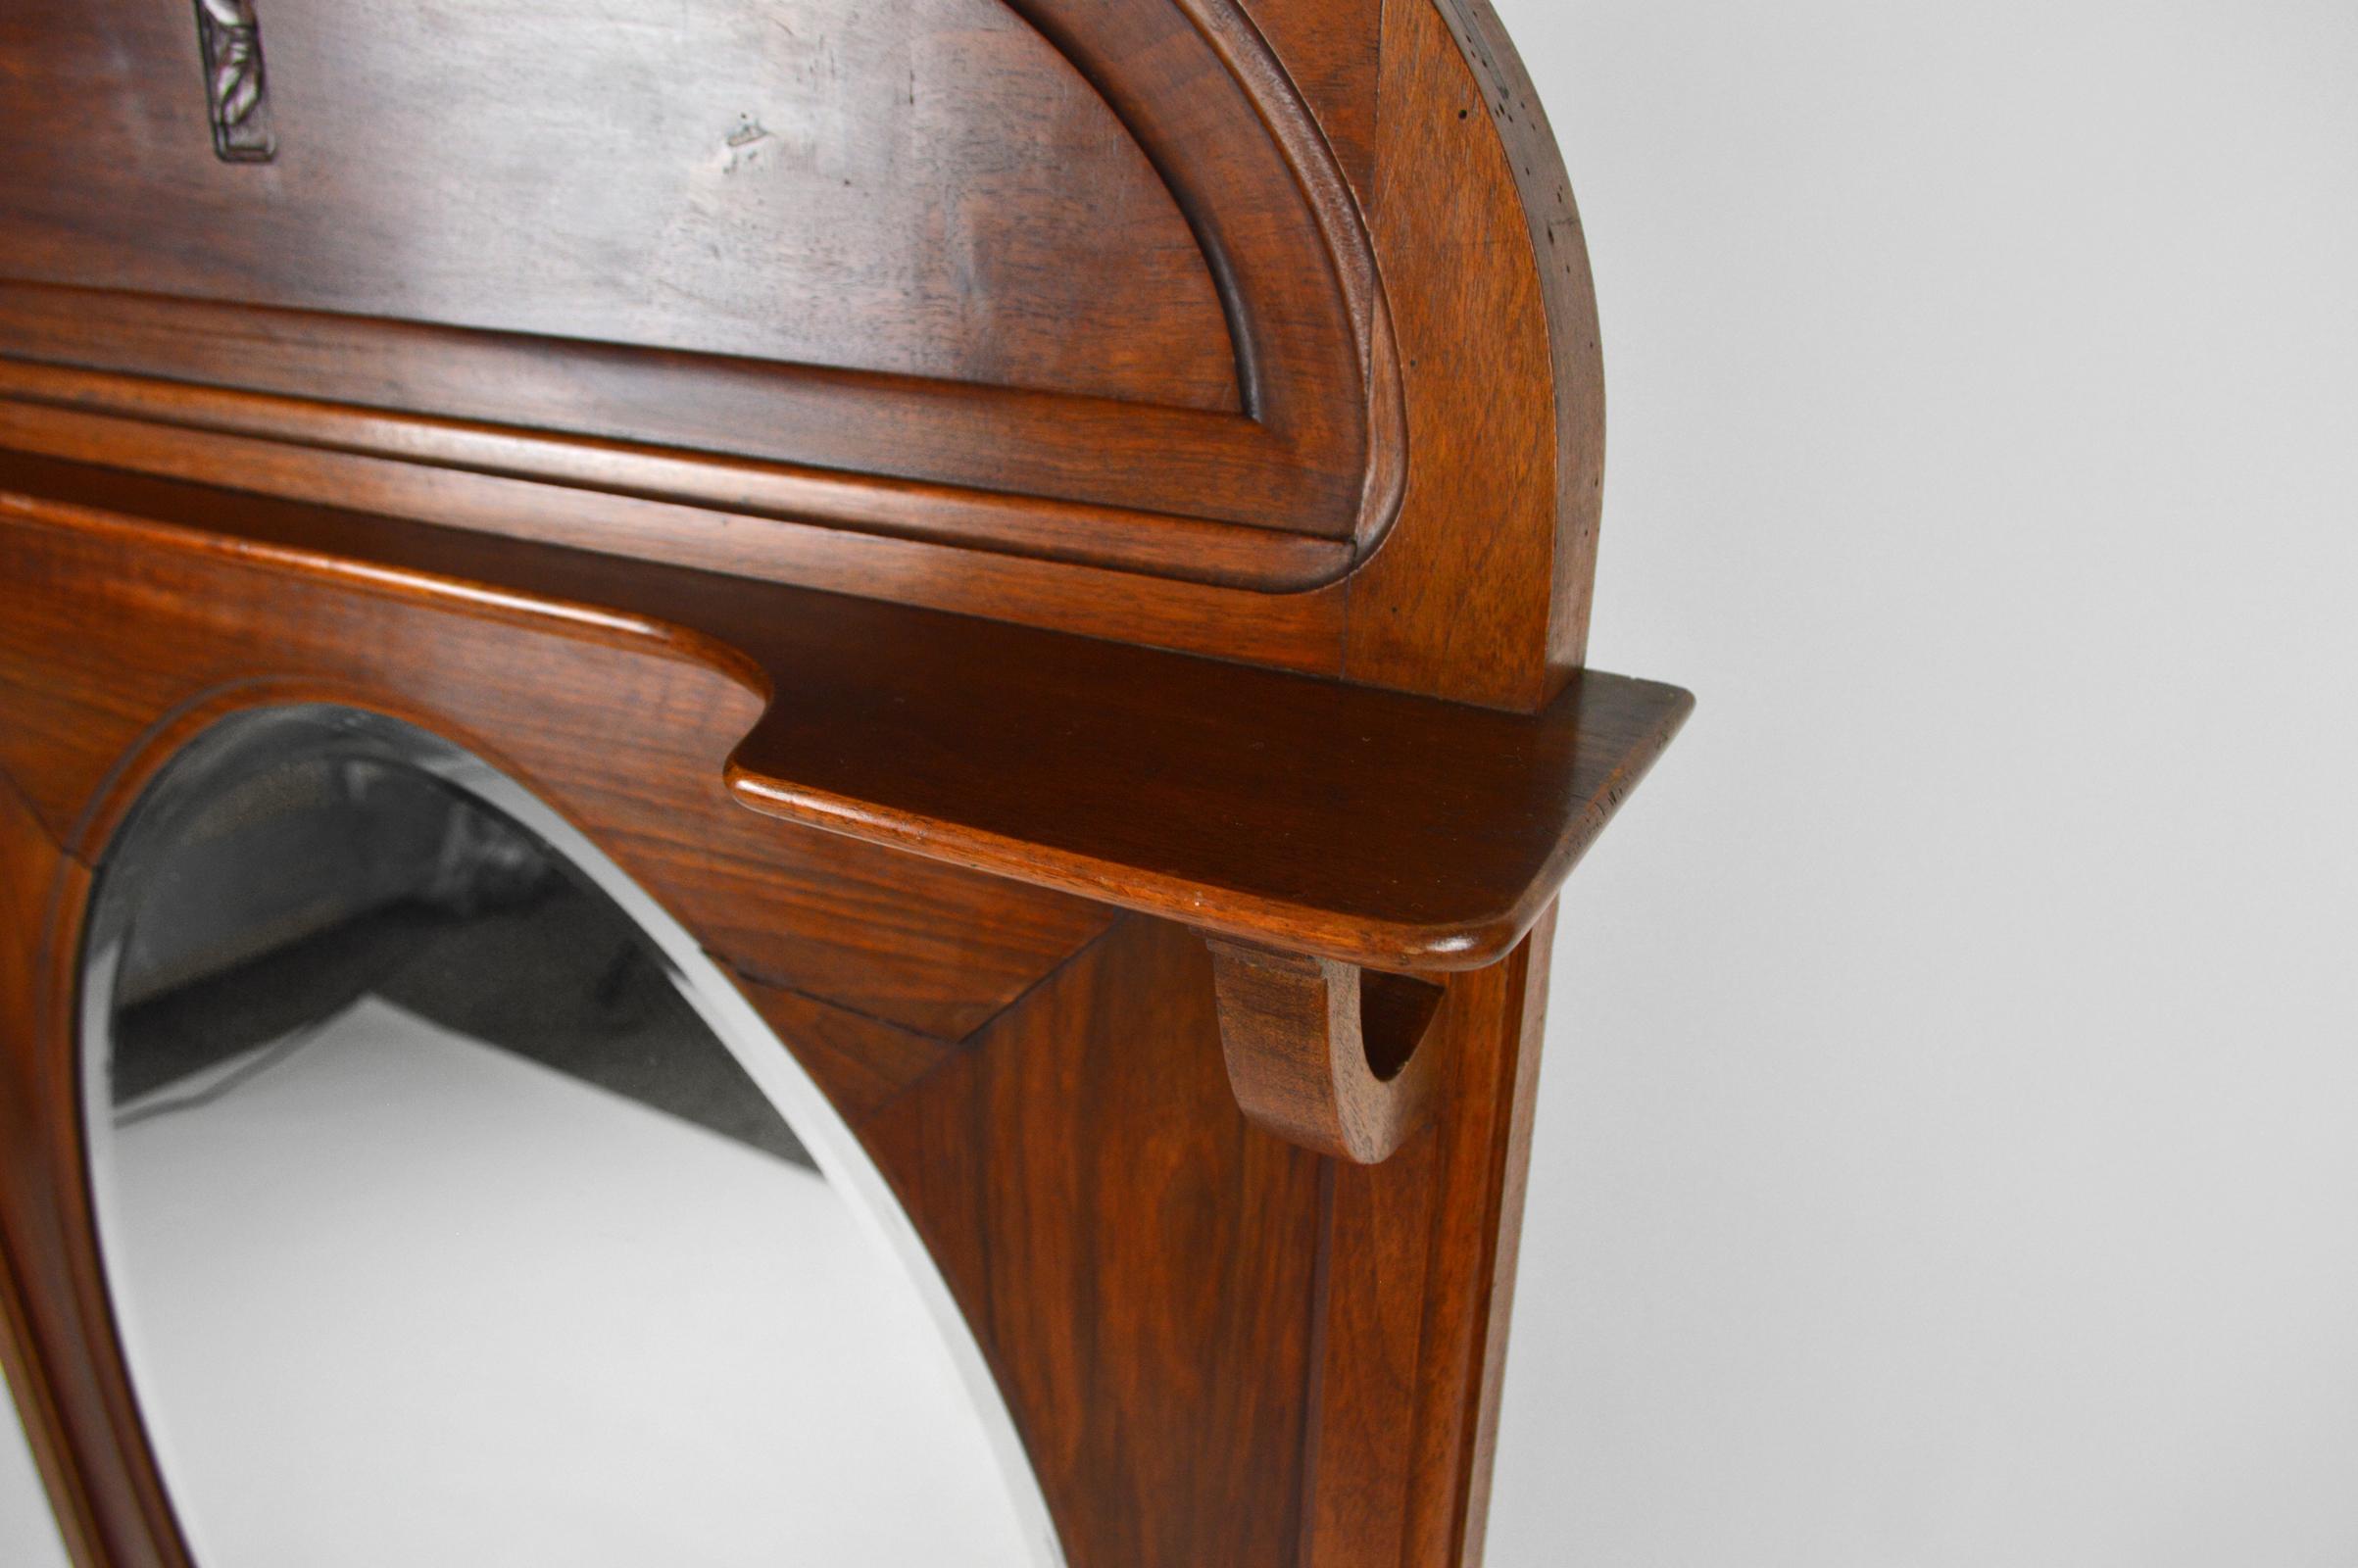 Oval Art Nouveau Fireplace Mirror in Carved Walnut, France, circa 1910 For Sale 4